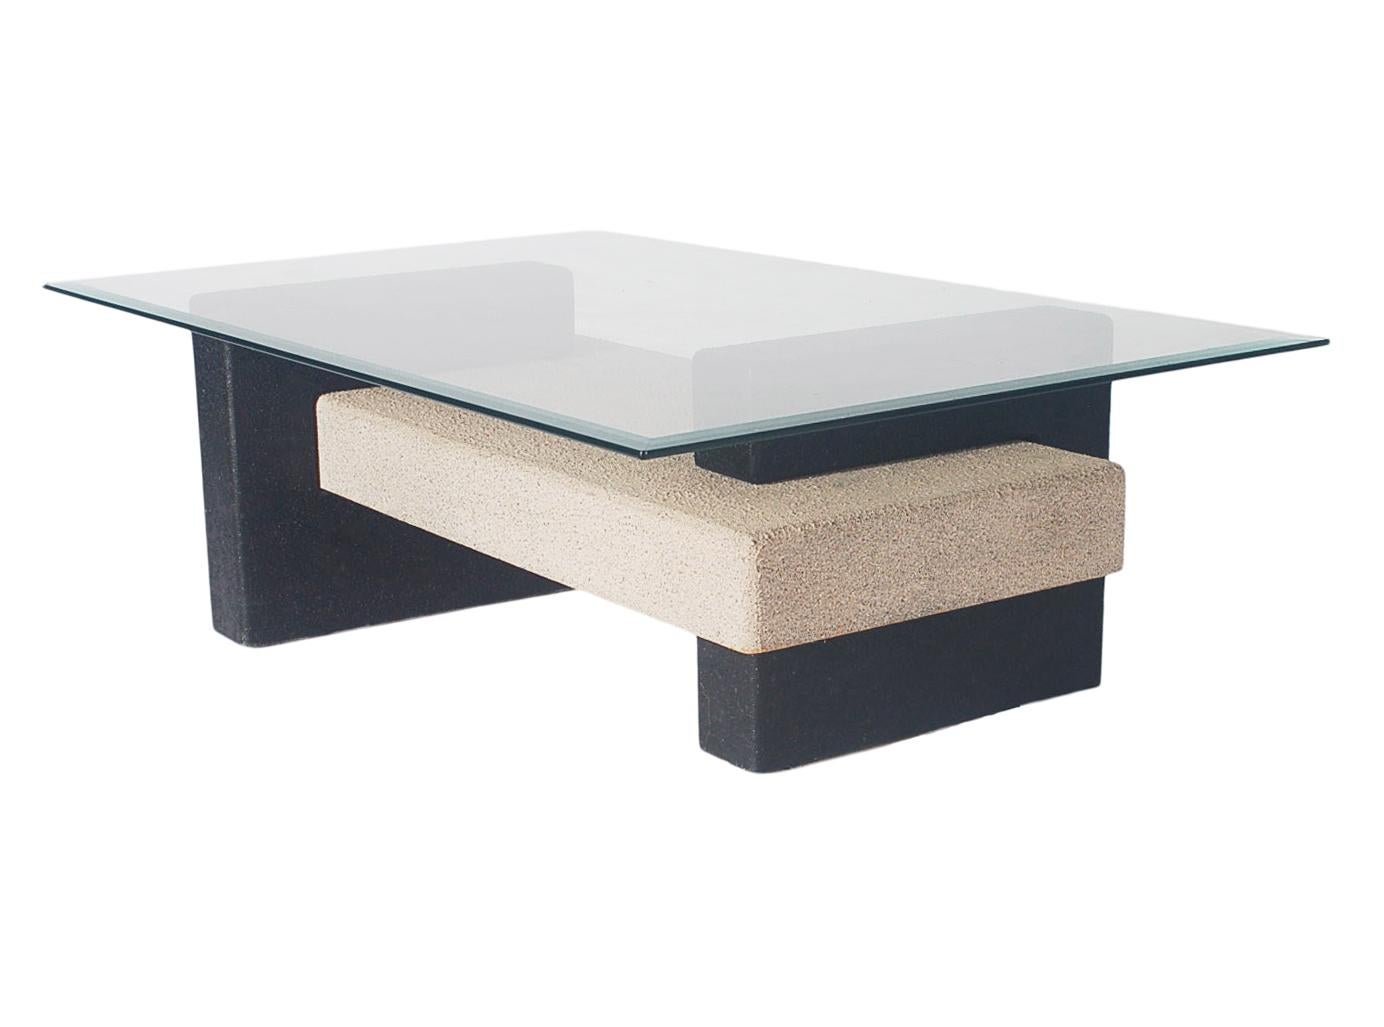 Sleek post modern design from Italy circa early 90's. Textured resin over wood with clear glass top. 